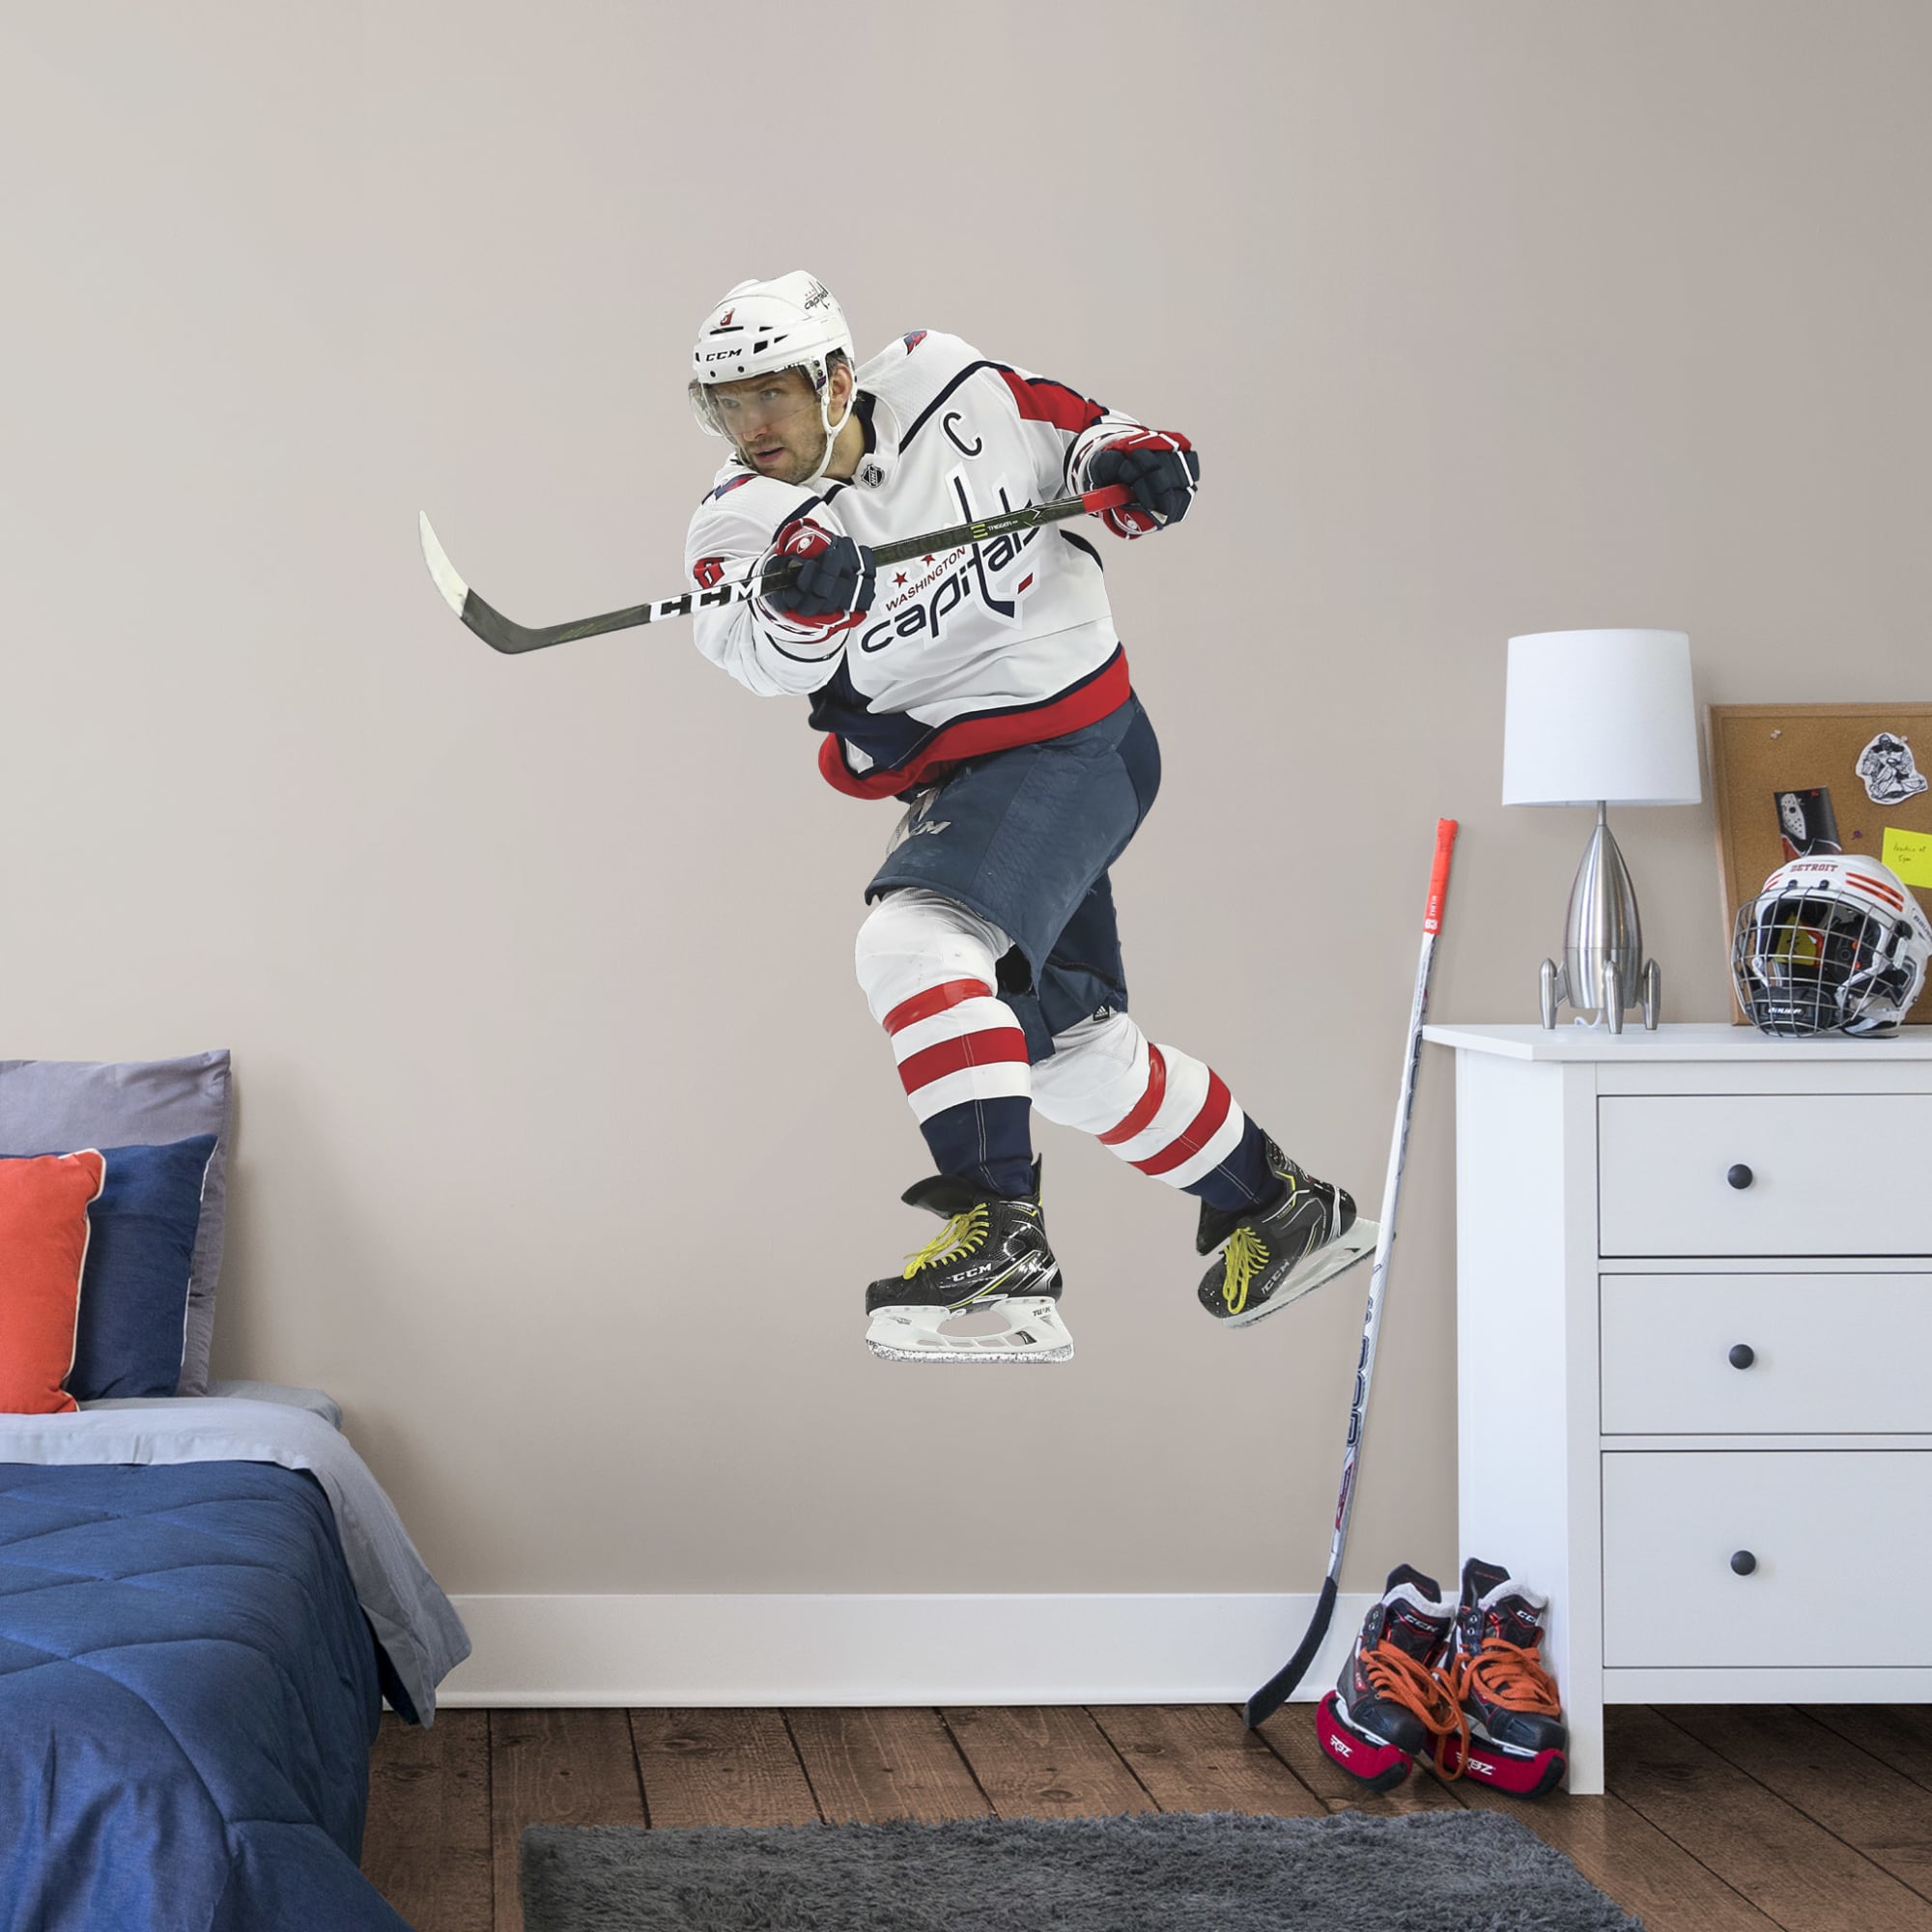 Alex Ovechkin for Washington Capitals - Officially Licensed NHL Removable Wall Decal Life-Size Athlete + 2 Decals (67"W x 74"H)